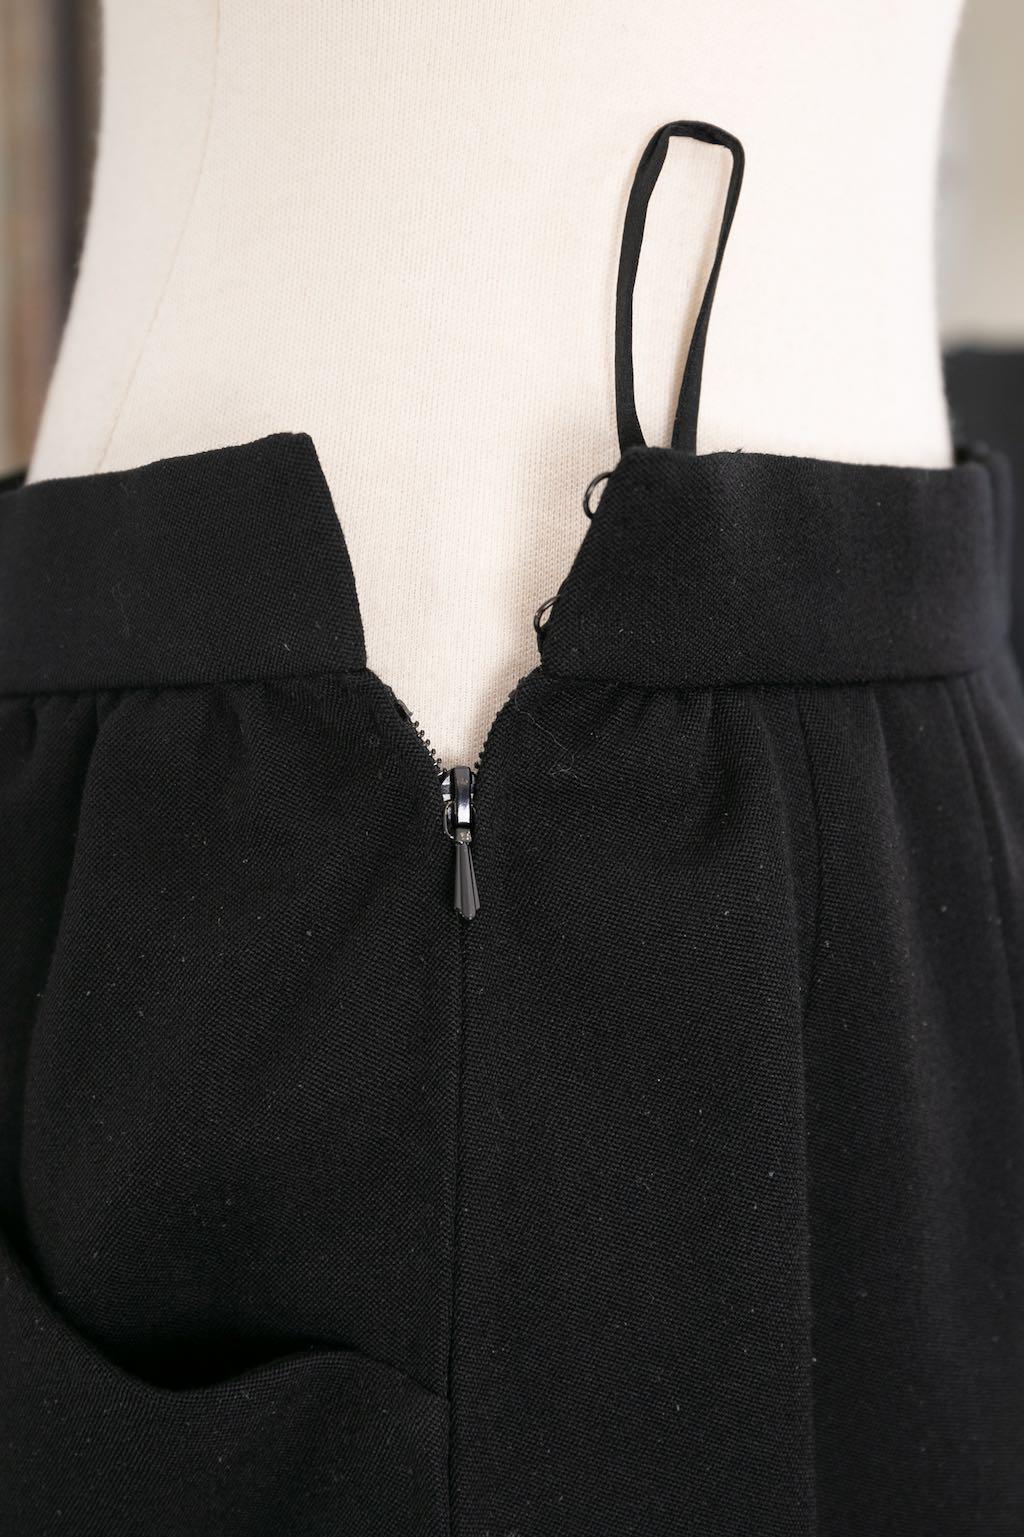 Yves Saint Laurent Haute Couture Black Skirt and Jacket Set, circa 1981/1982 For Sale 8